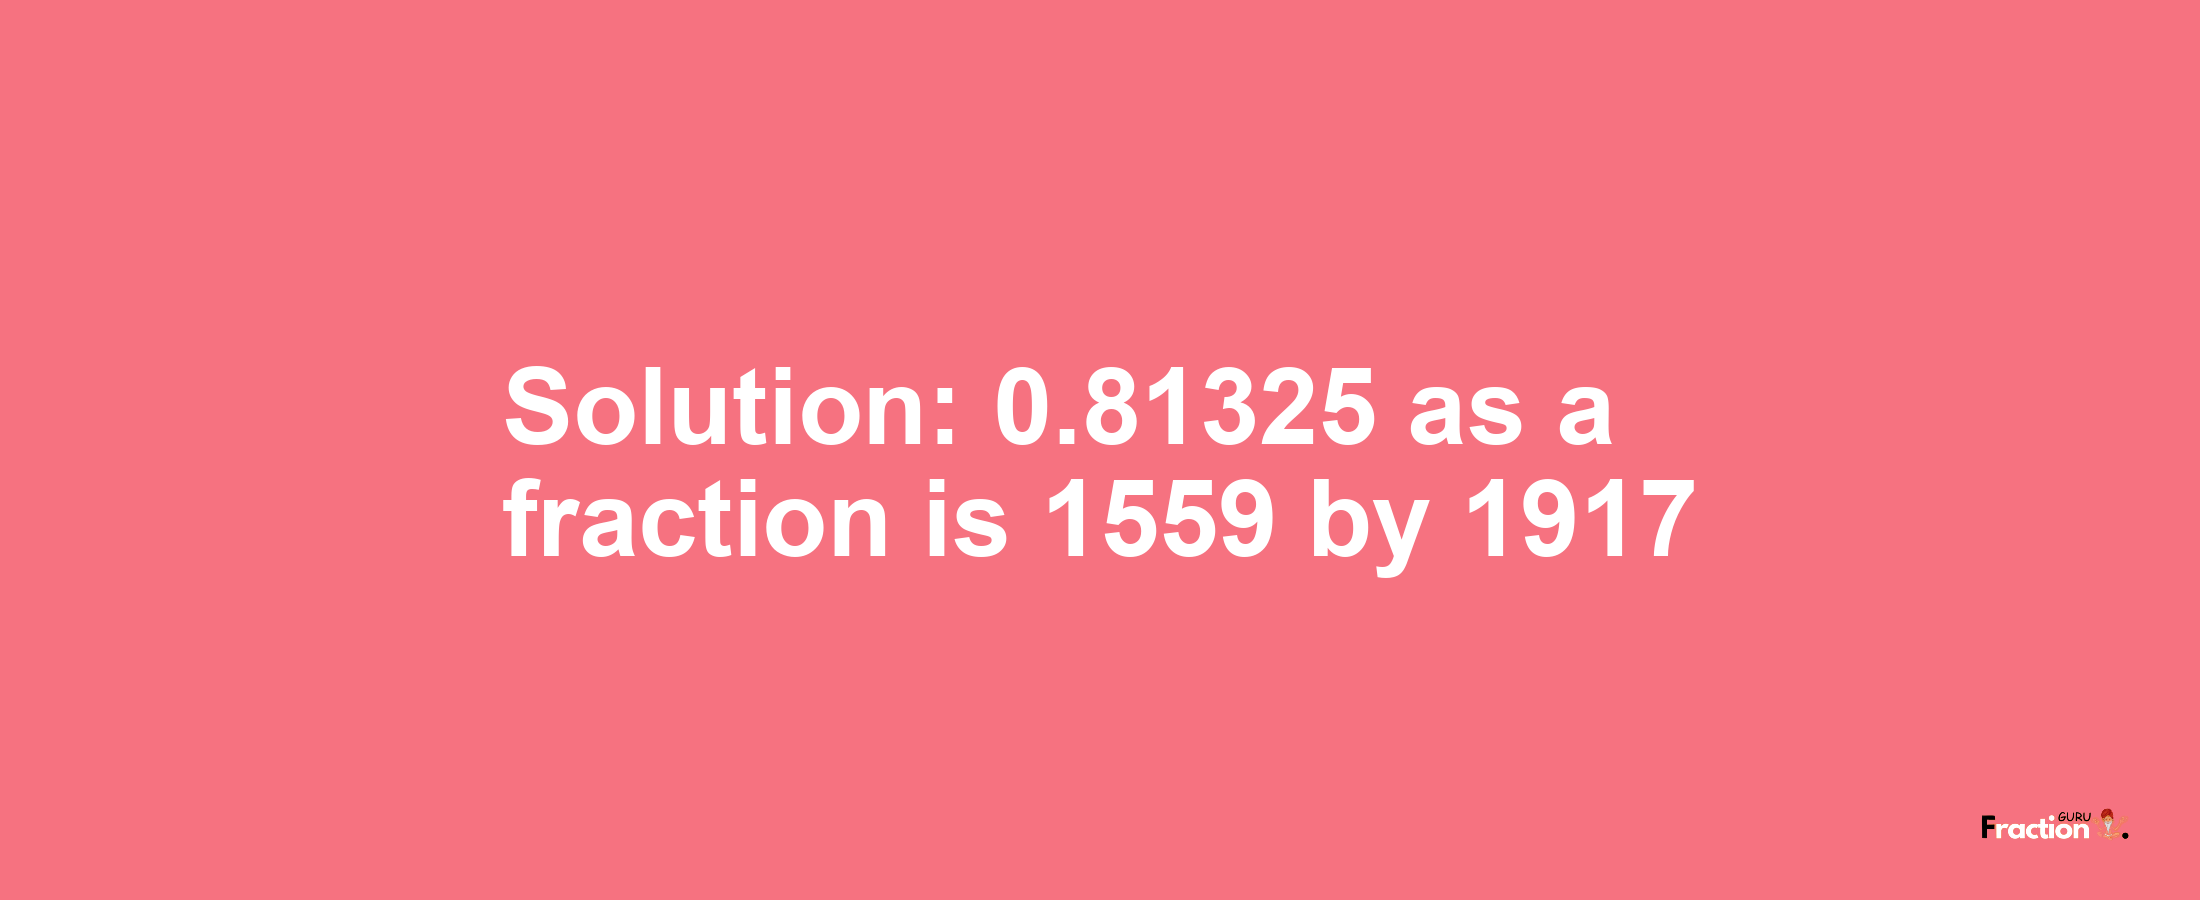 Solution:0.81325 as a fraction is 1559/1917